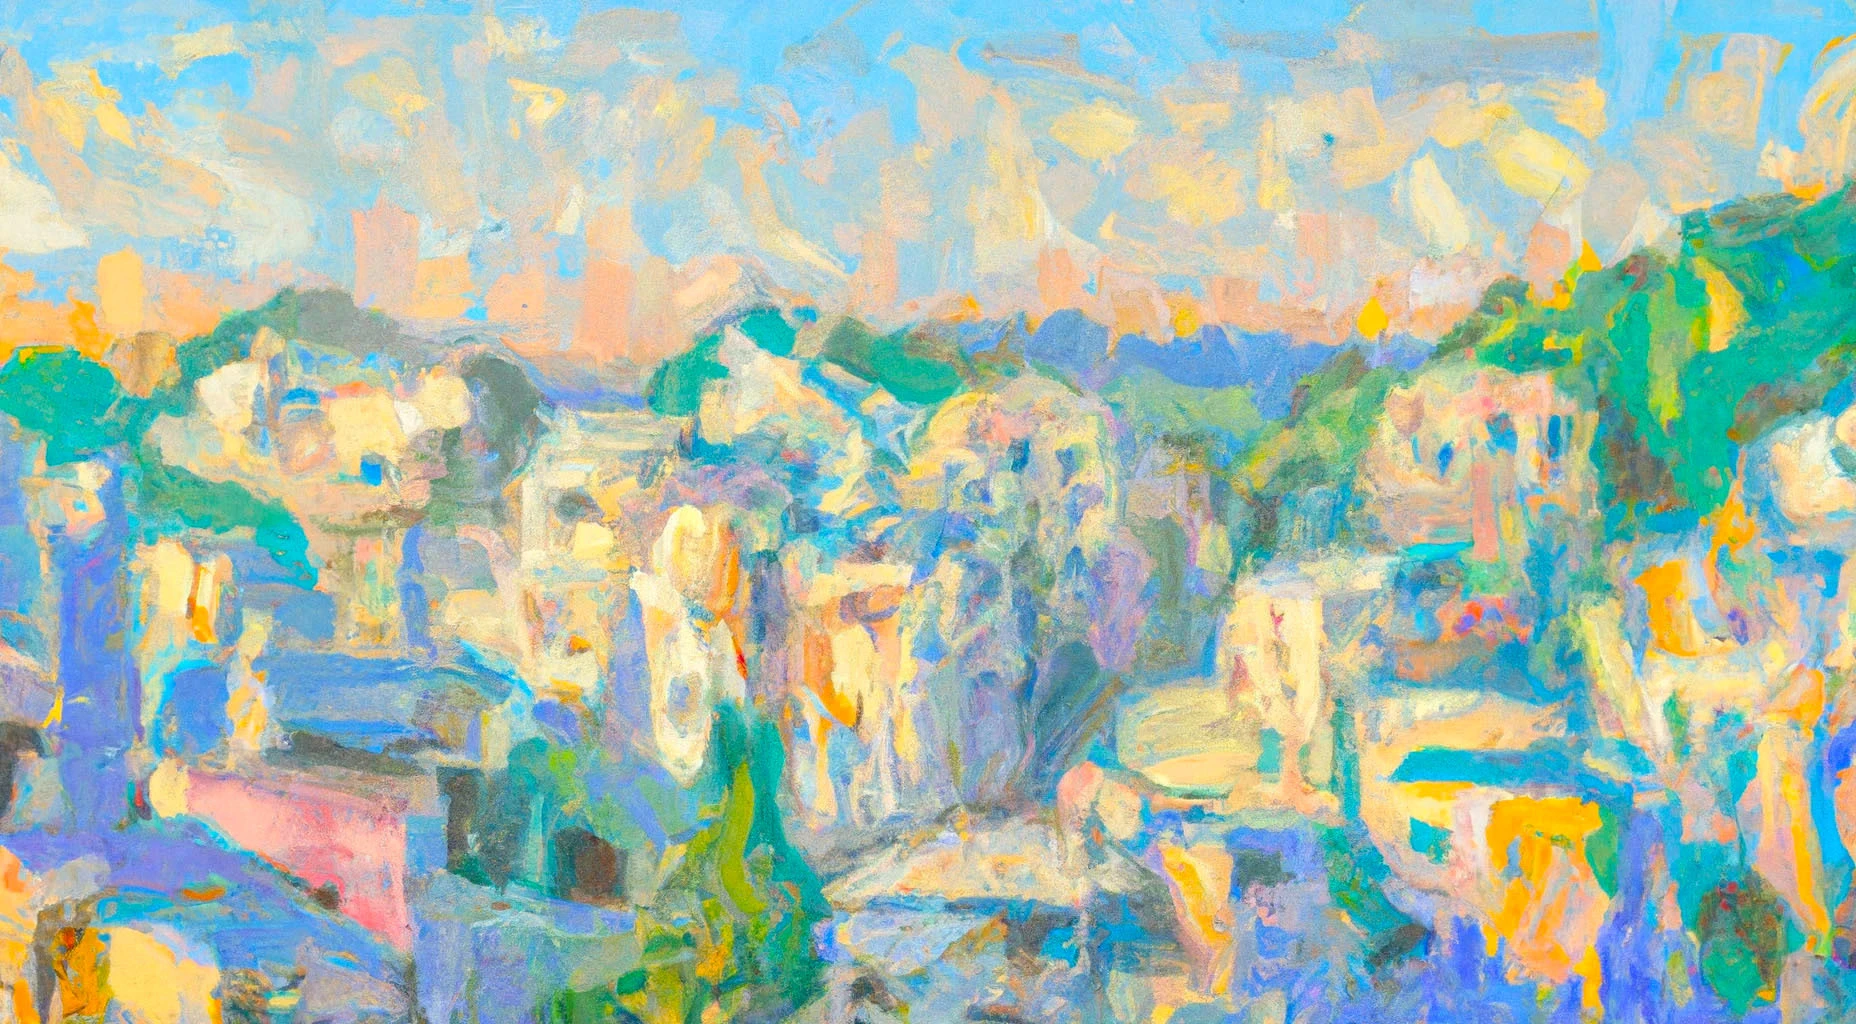 An impressionist painting depicting a colorful cityscape with expressive brushstrokes in a palette of blues, greens, yellows, and hints of pink under a light sky.